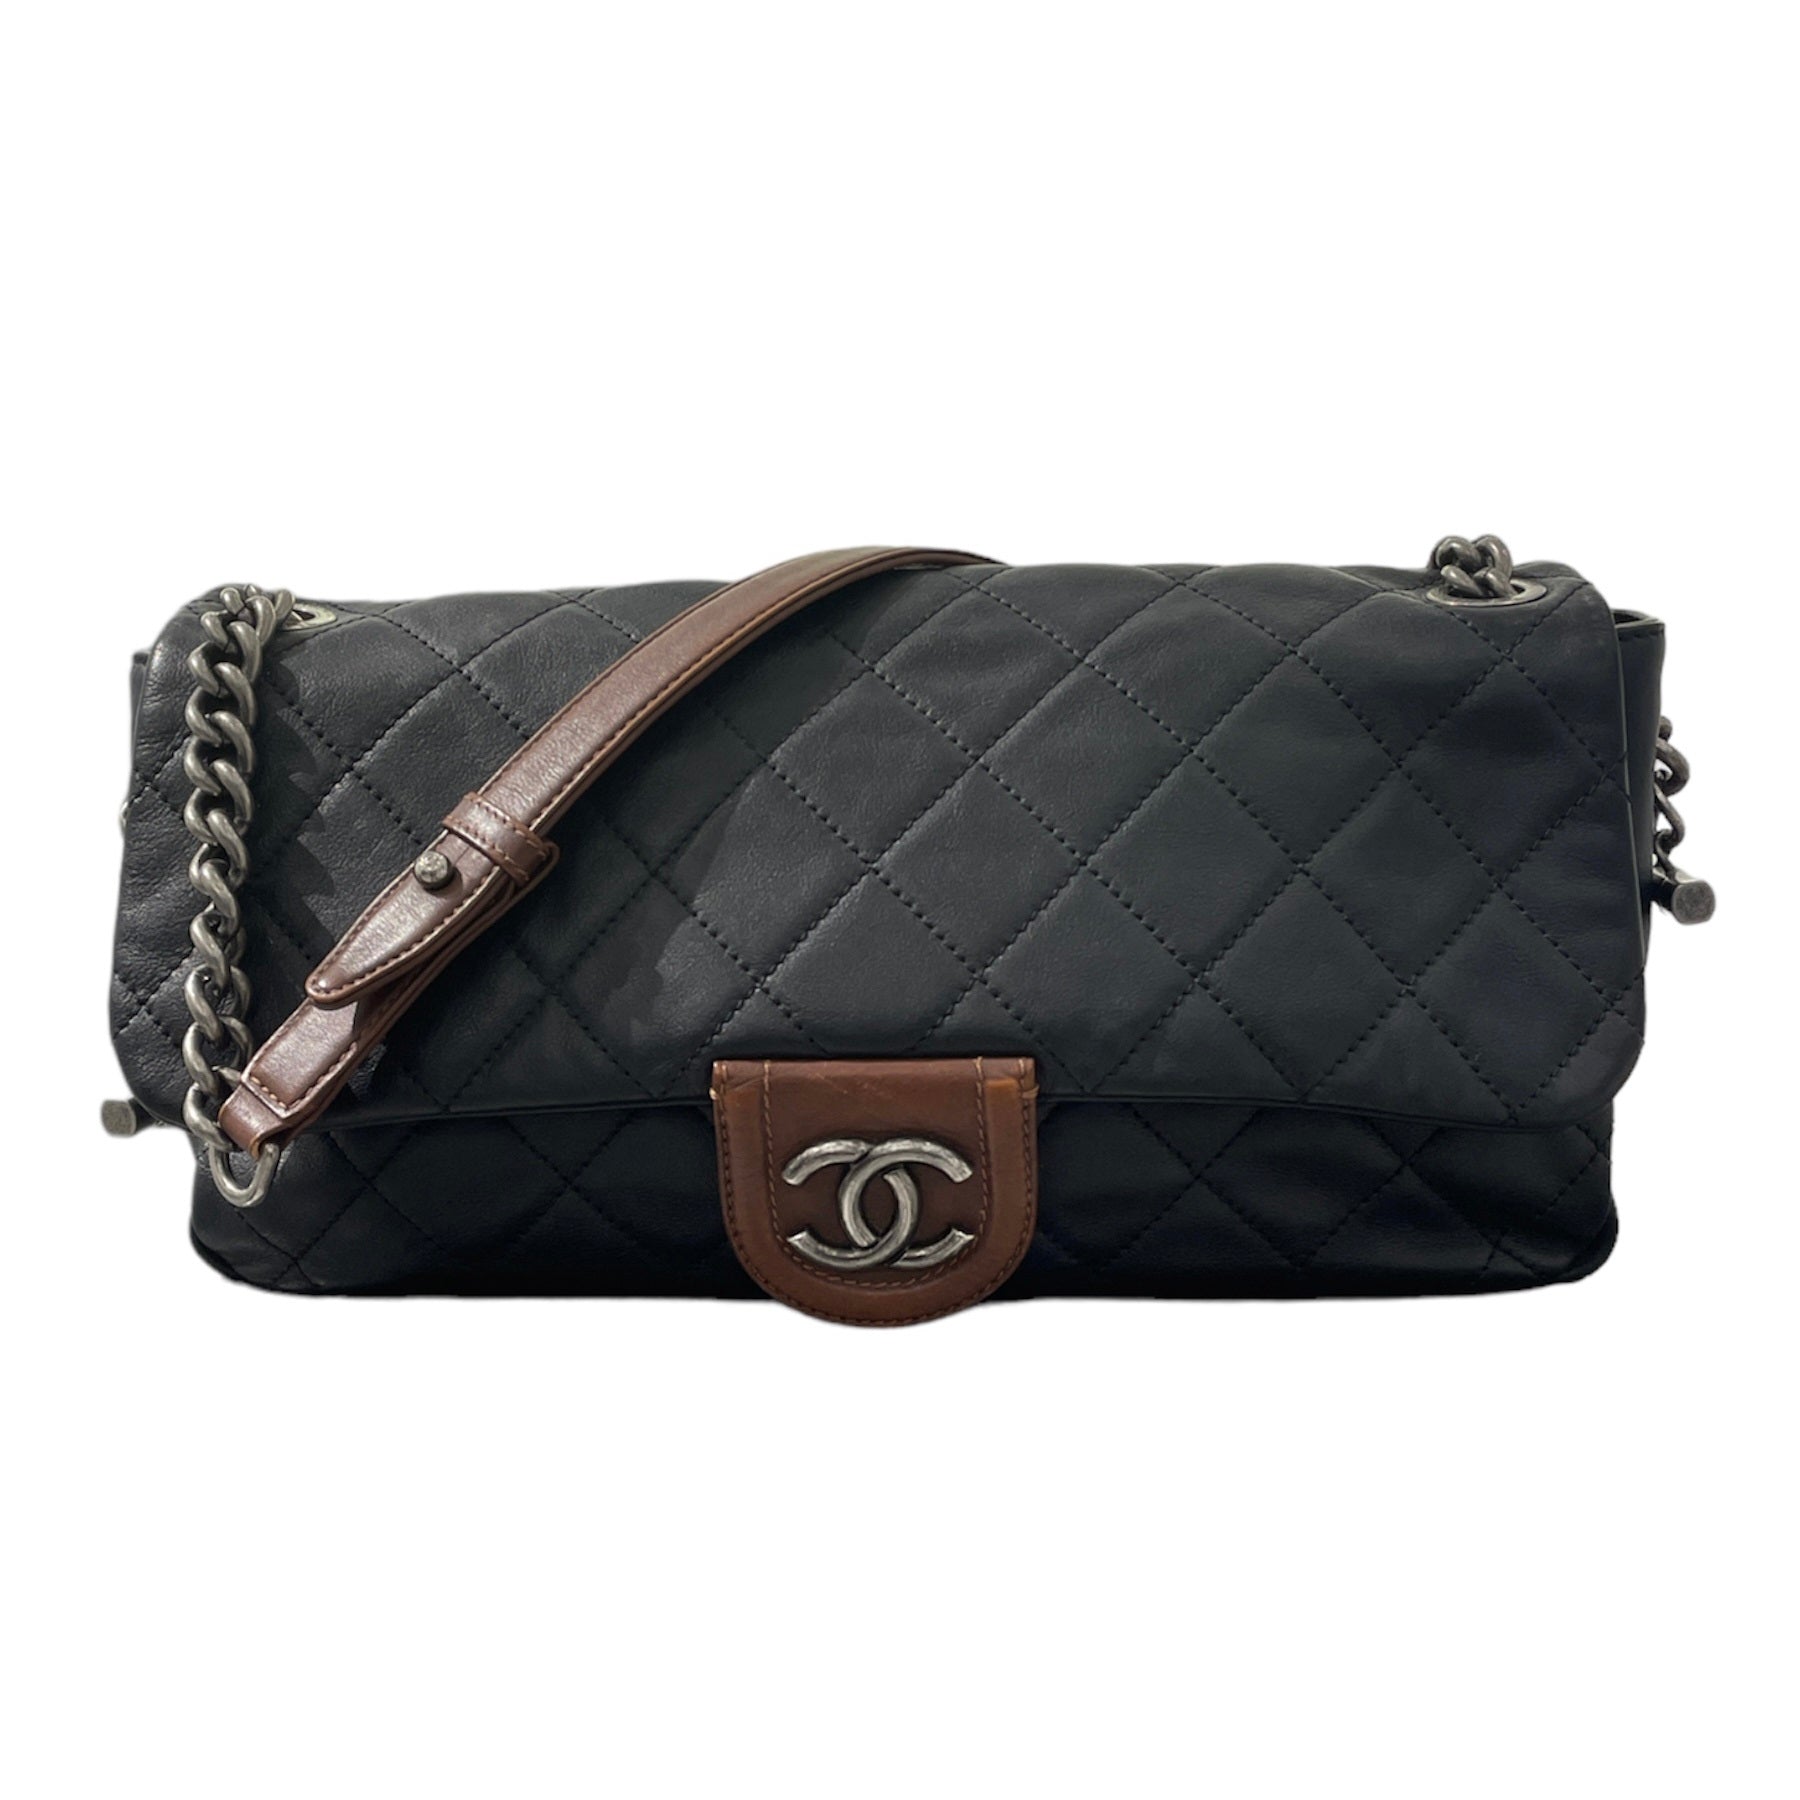 Chanel Bicolor CC Country Chic Flap Bag